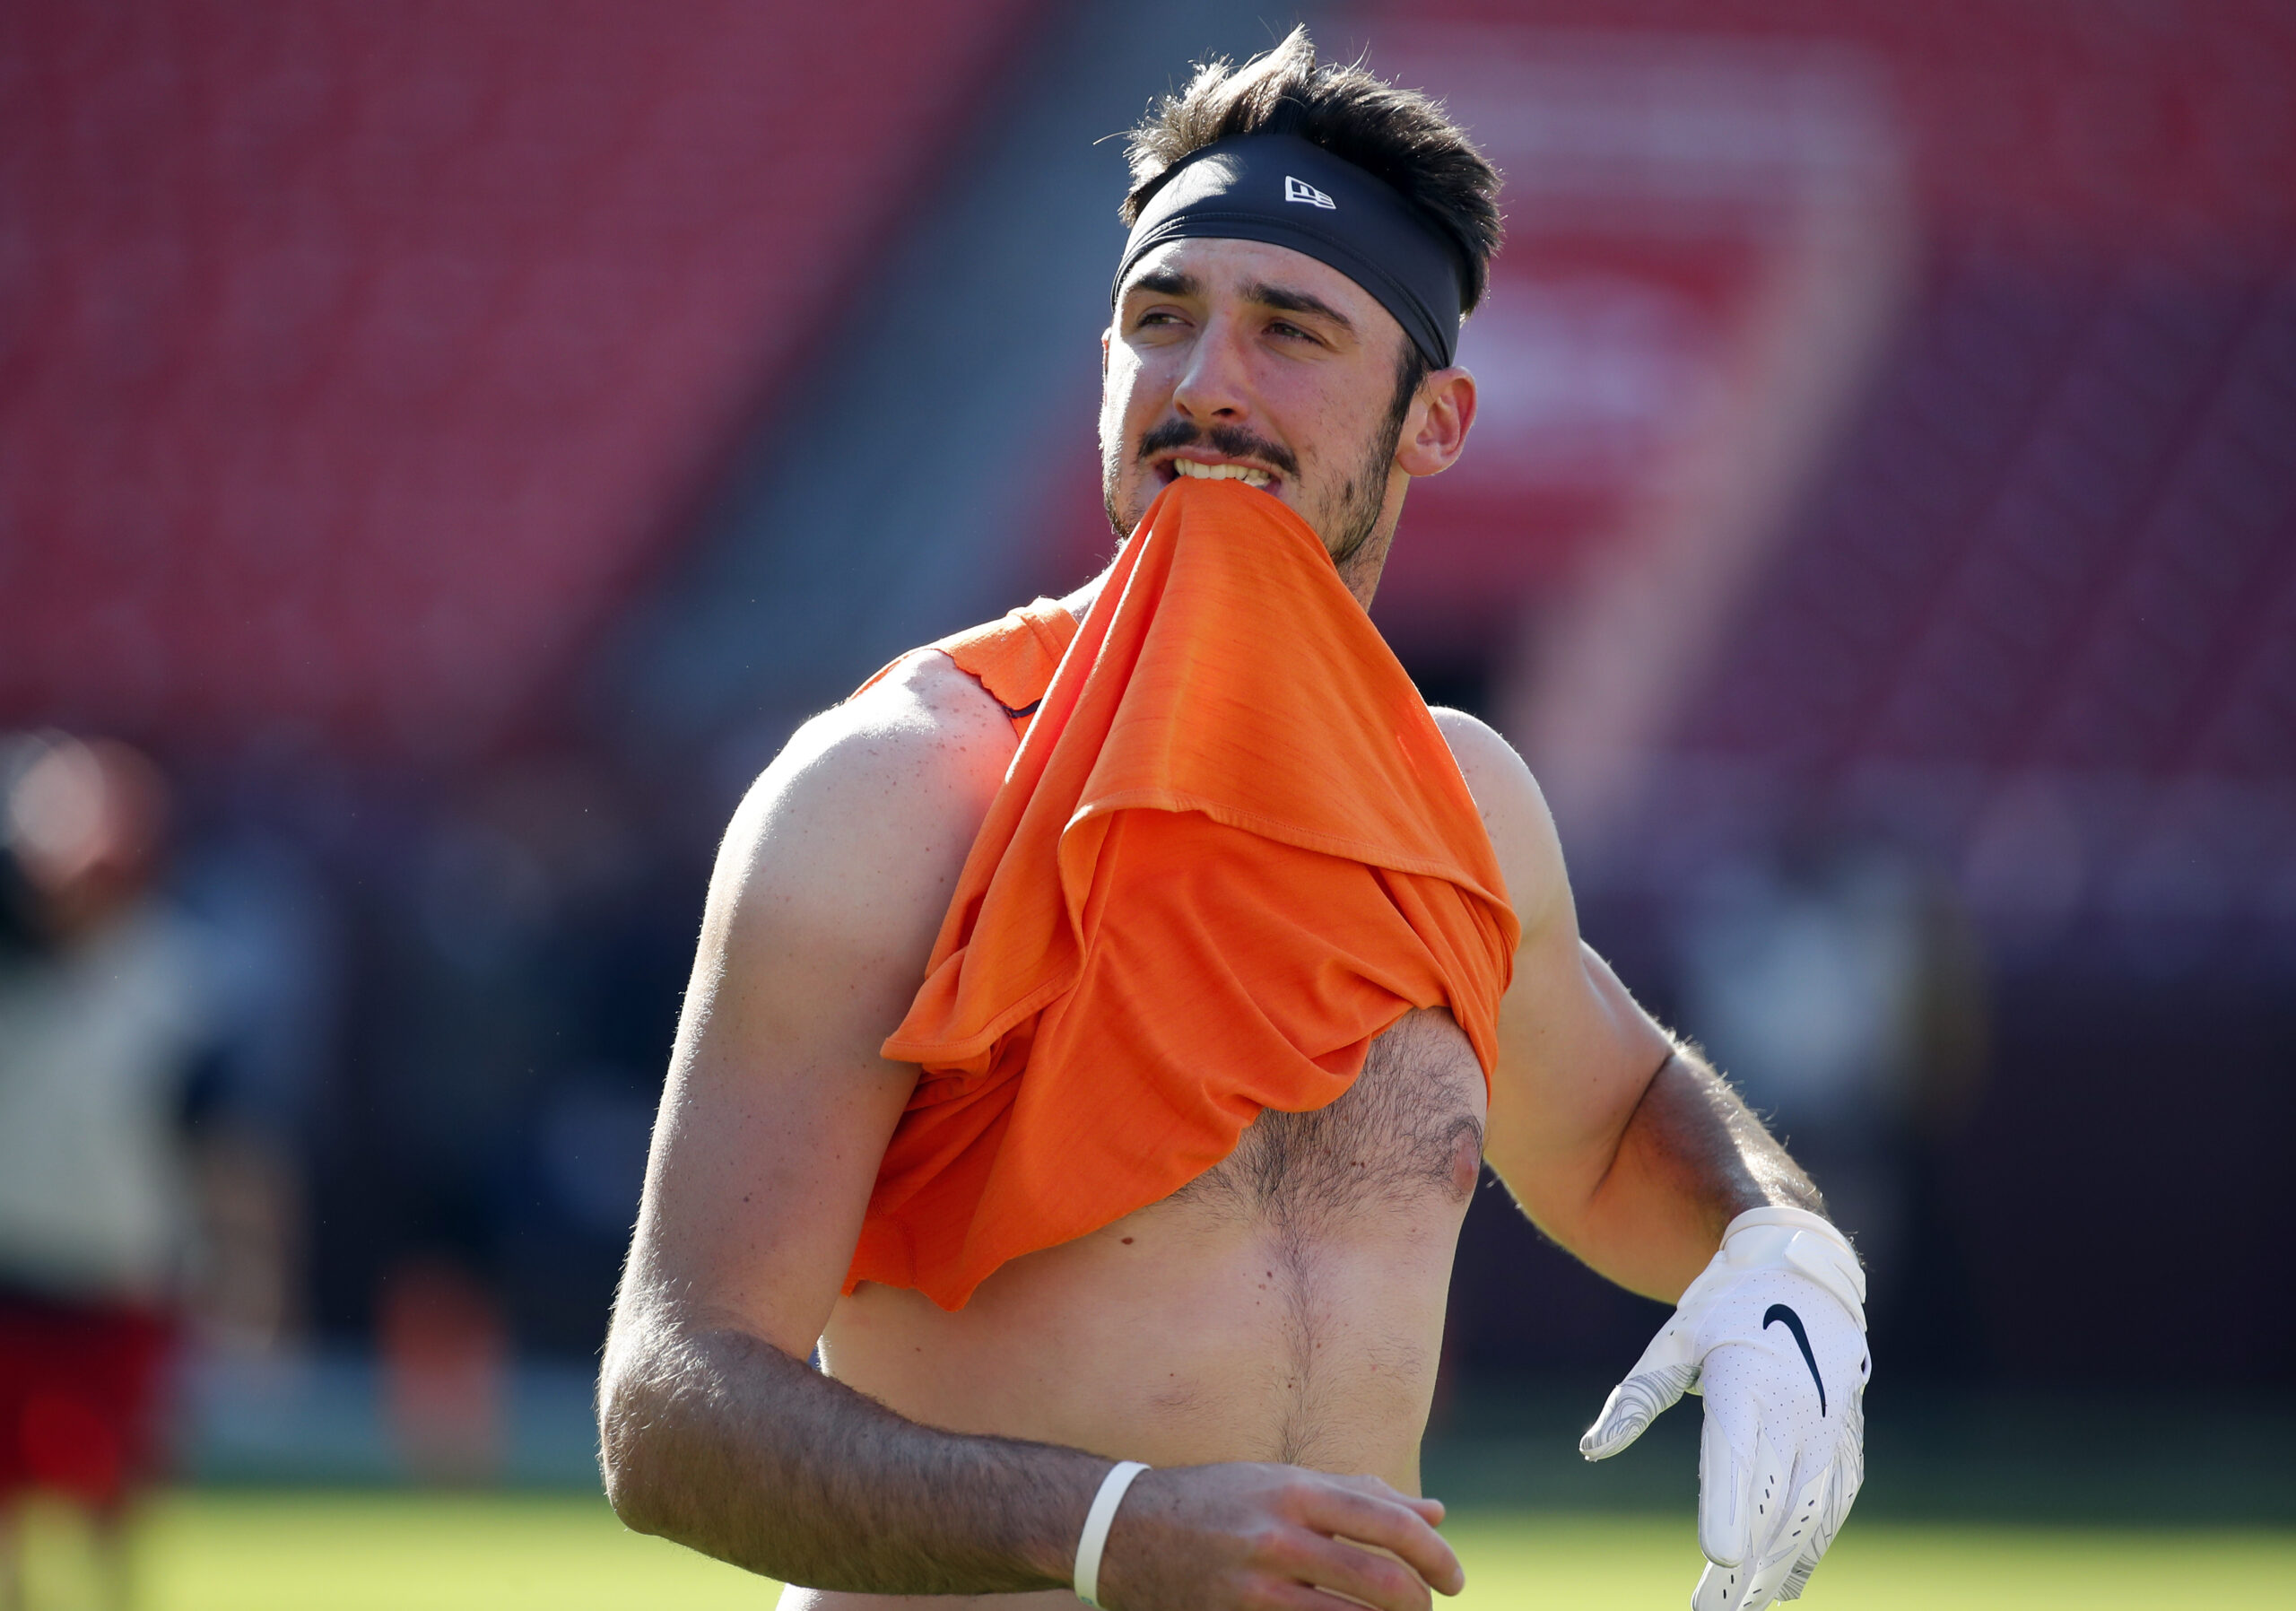 After being cut by CFL team, Paxton Lynch’s football future is in doubt